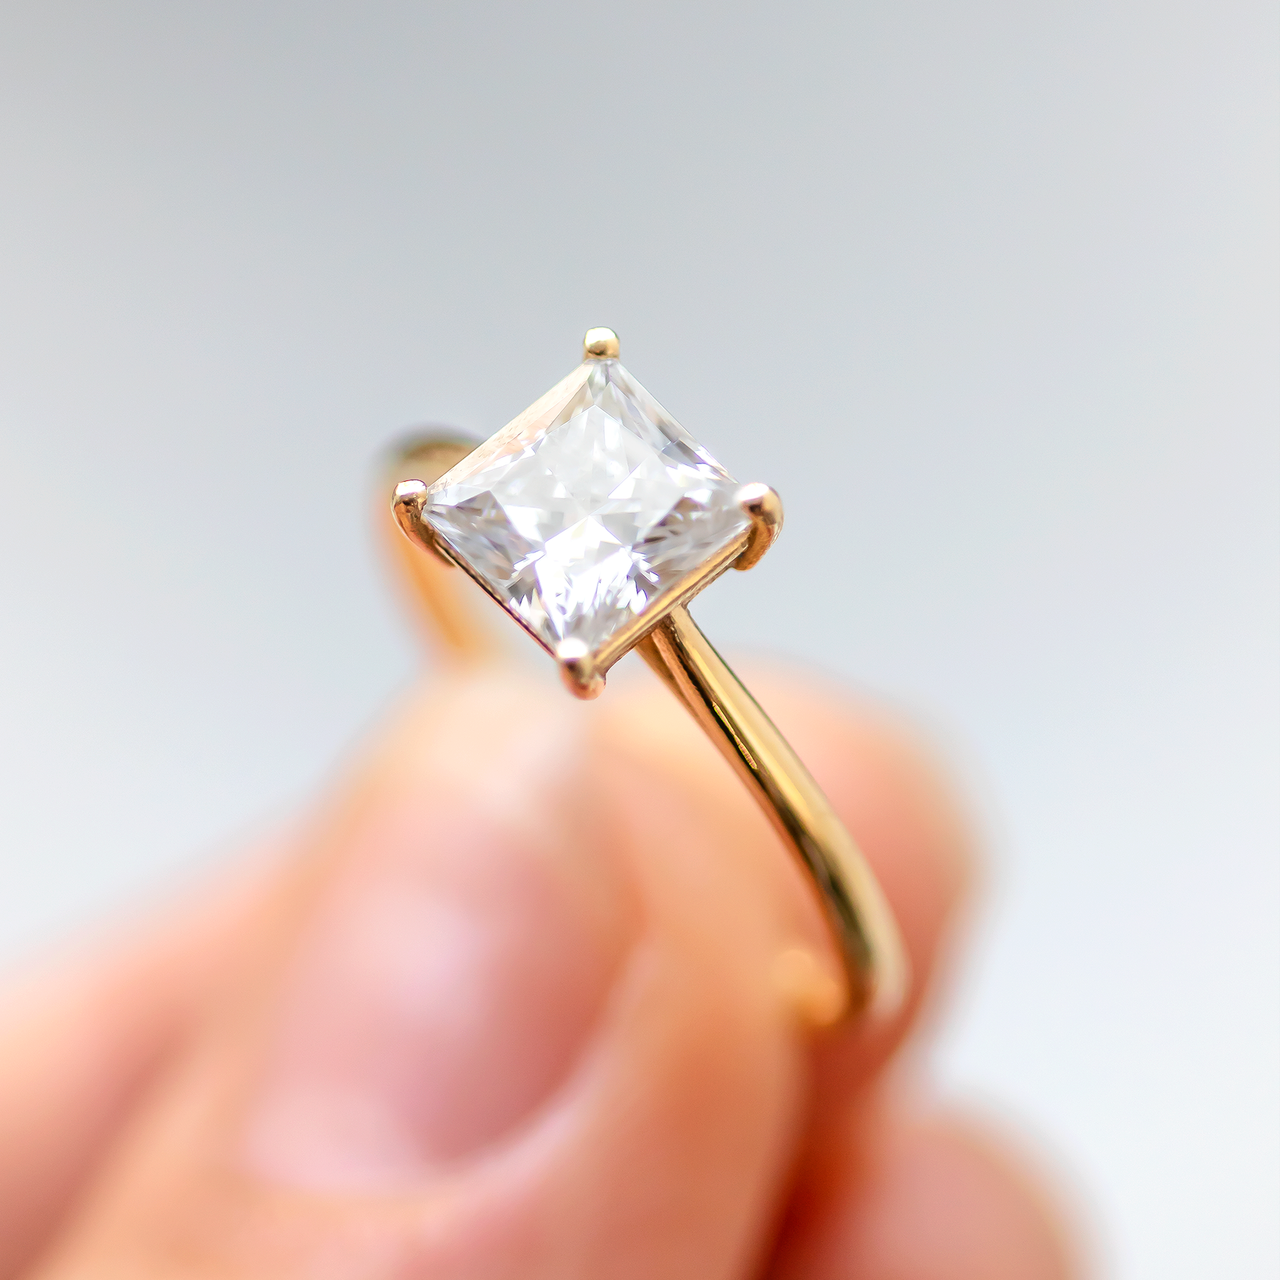 Keyzar · How To Snag The Most Stunning Princess Cut Engagement Ring  Princess Cut Engagement Rings - The Square That Slays